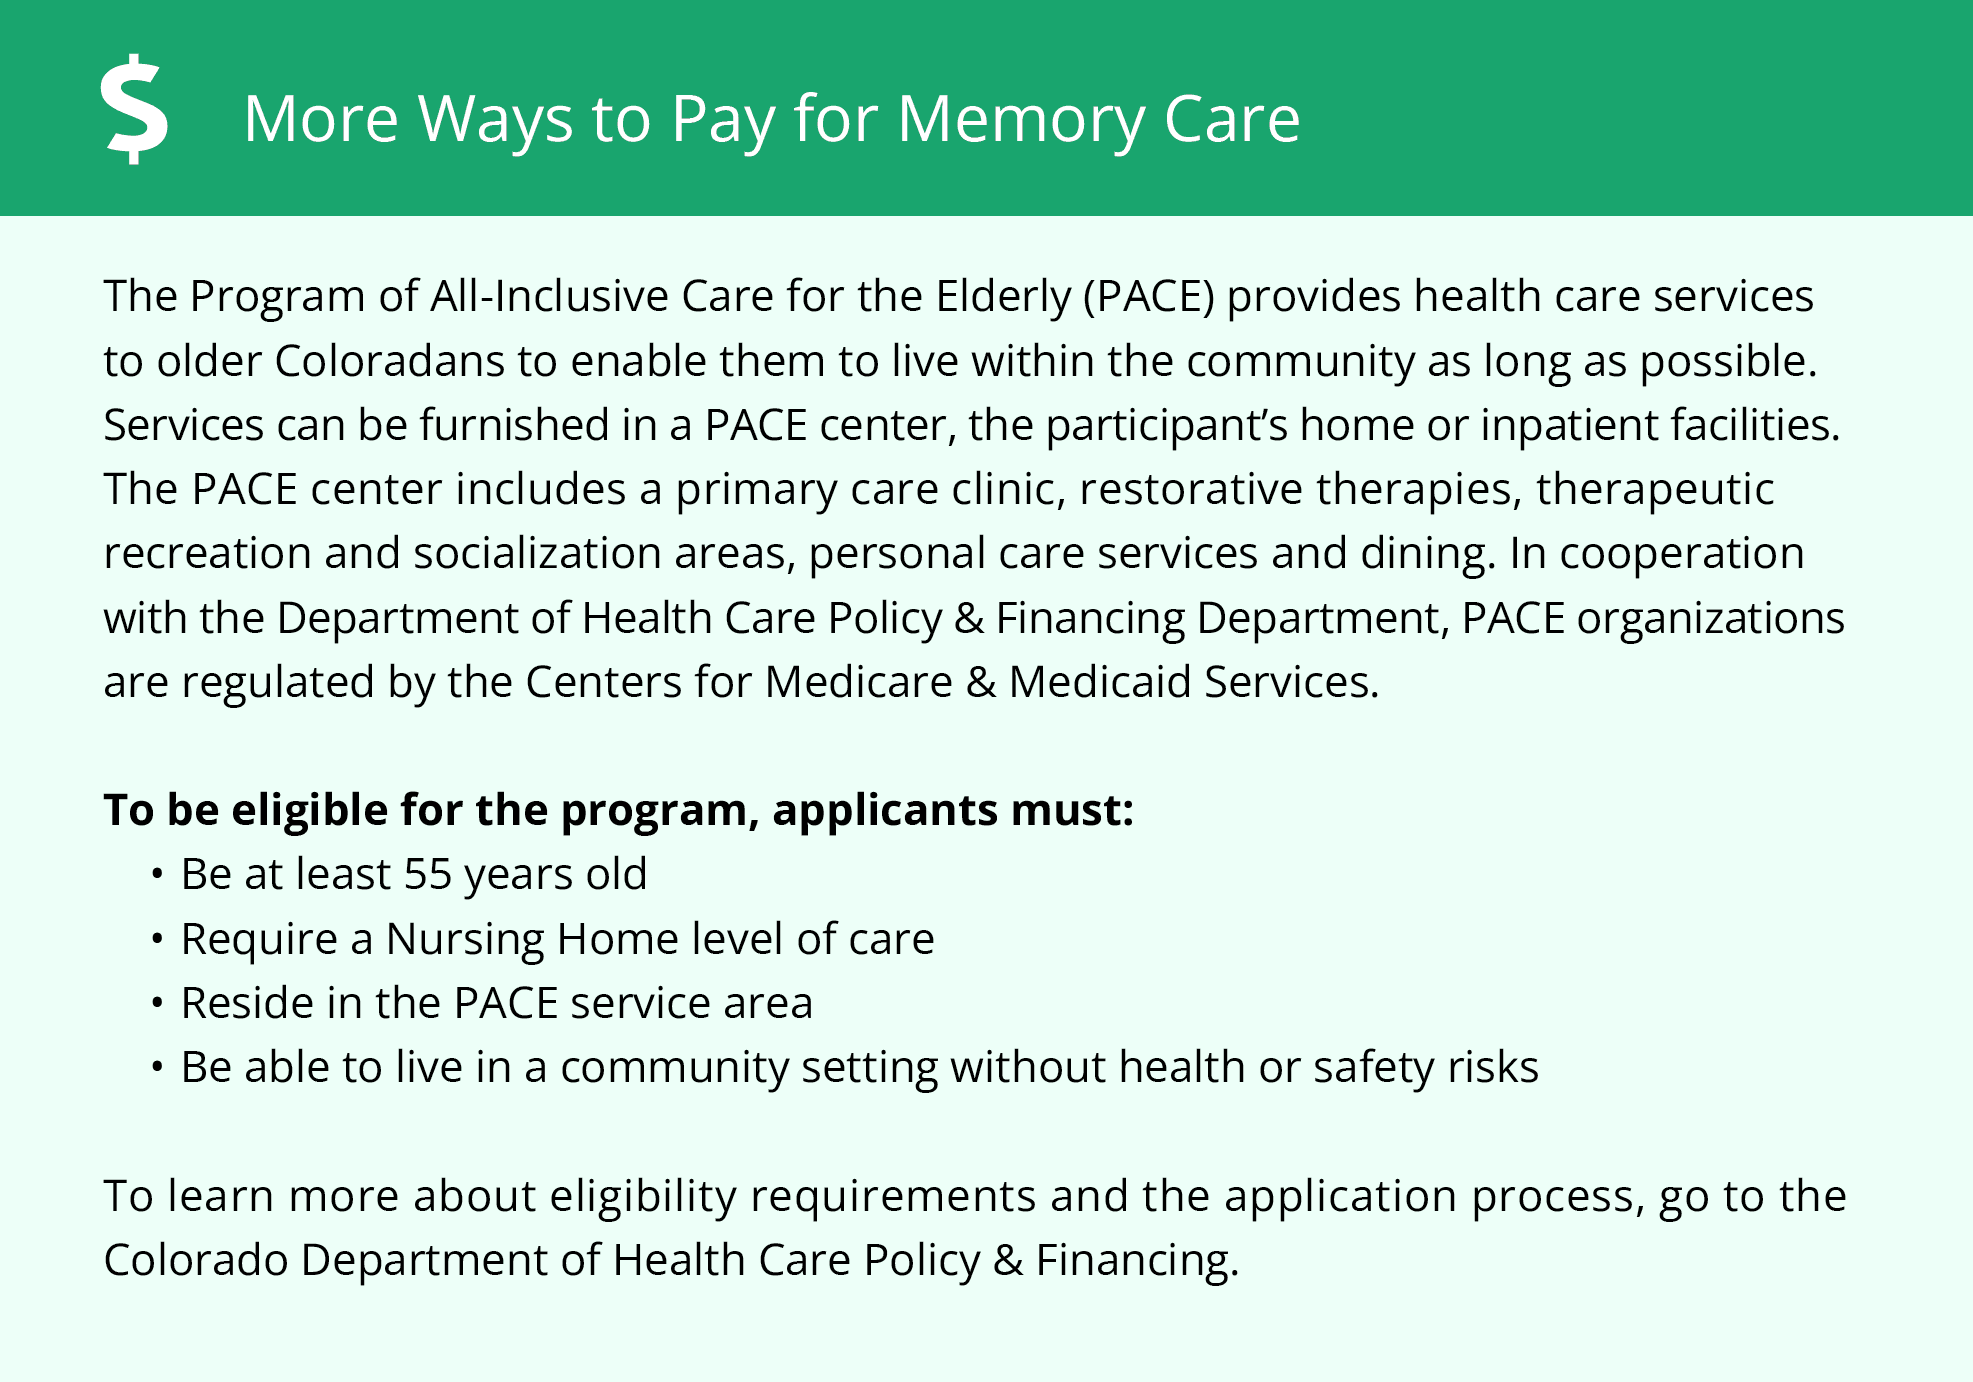 More ways to pay for memory care in Colorado